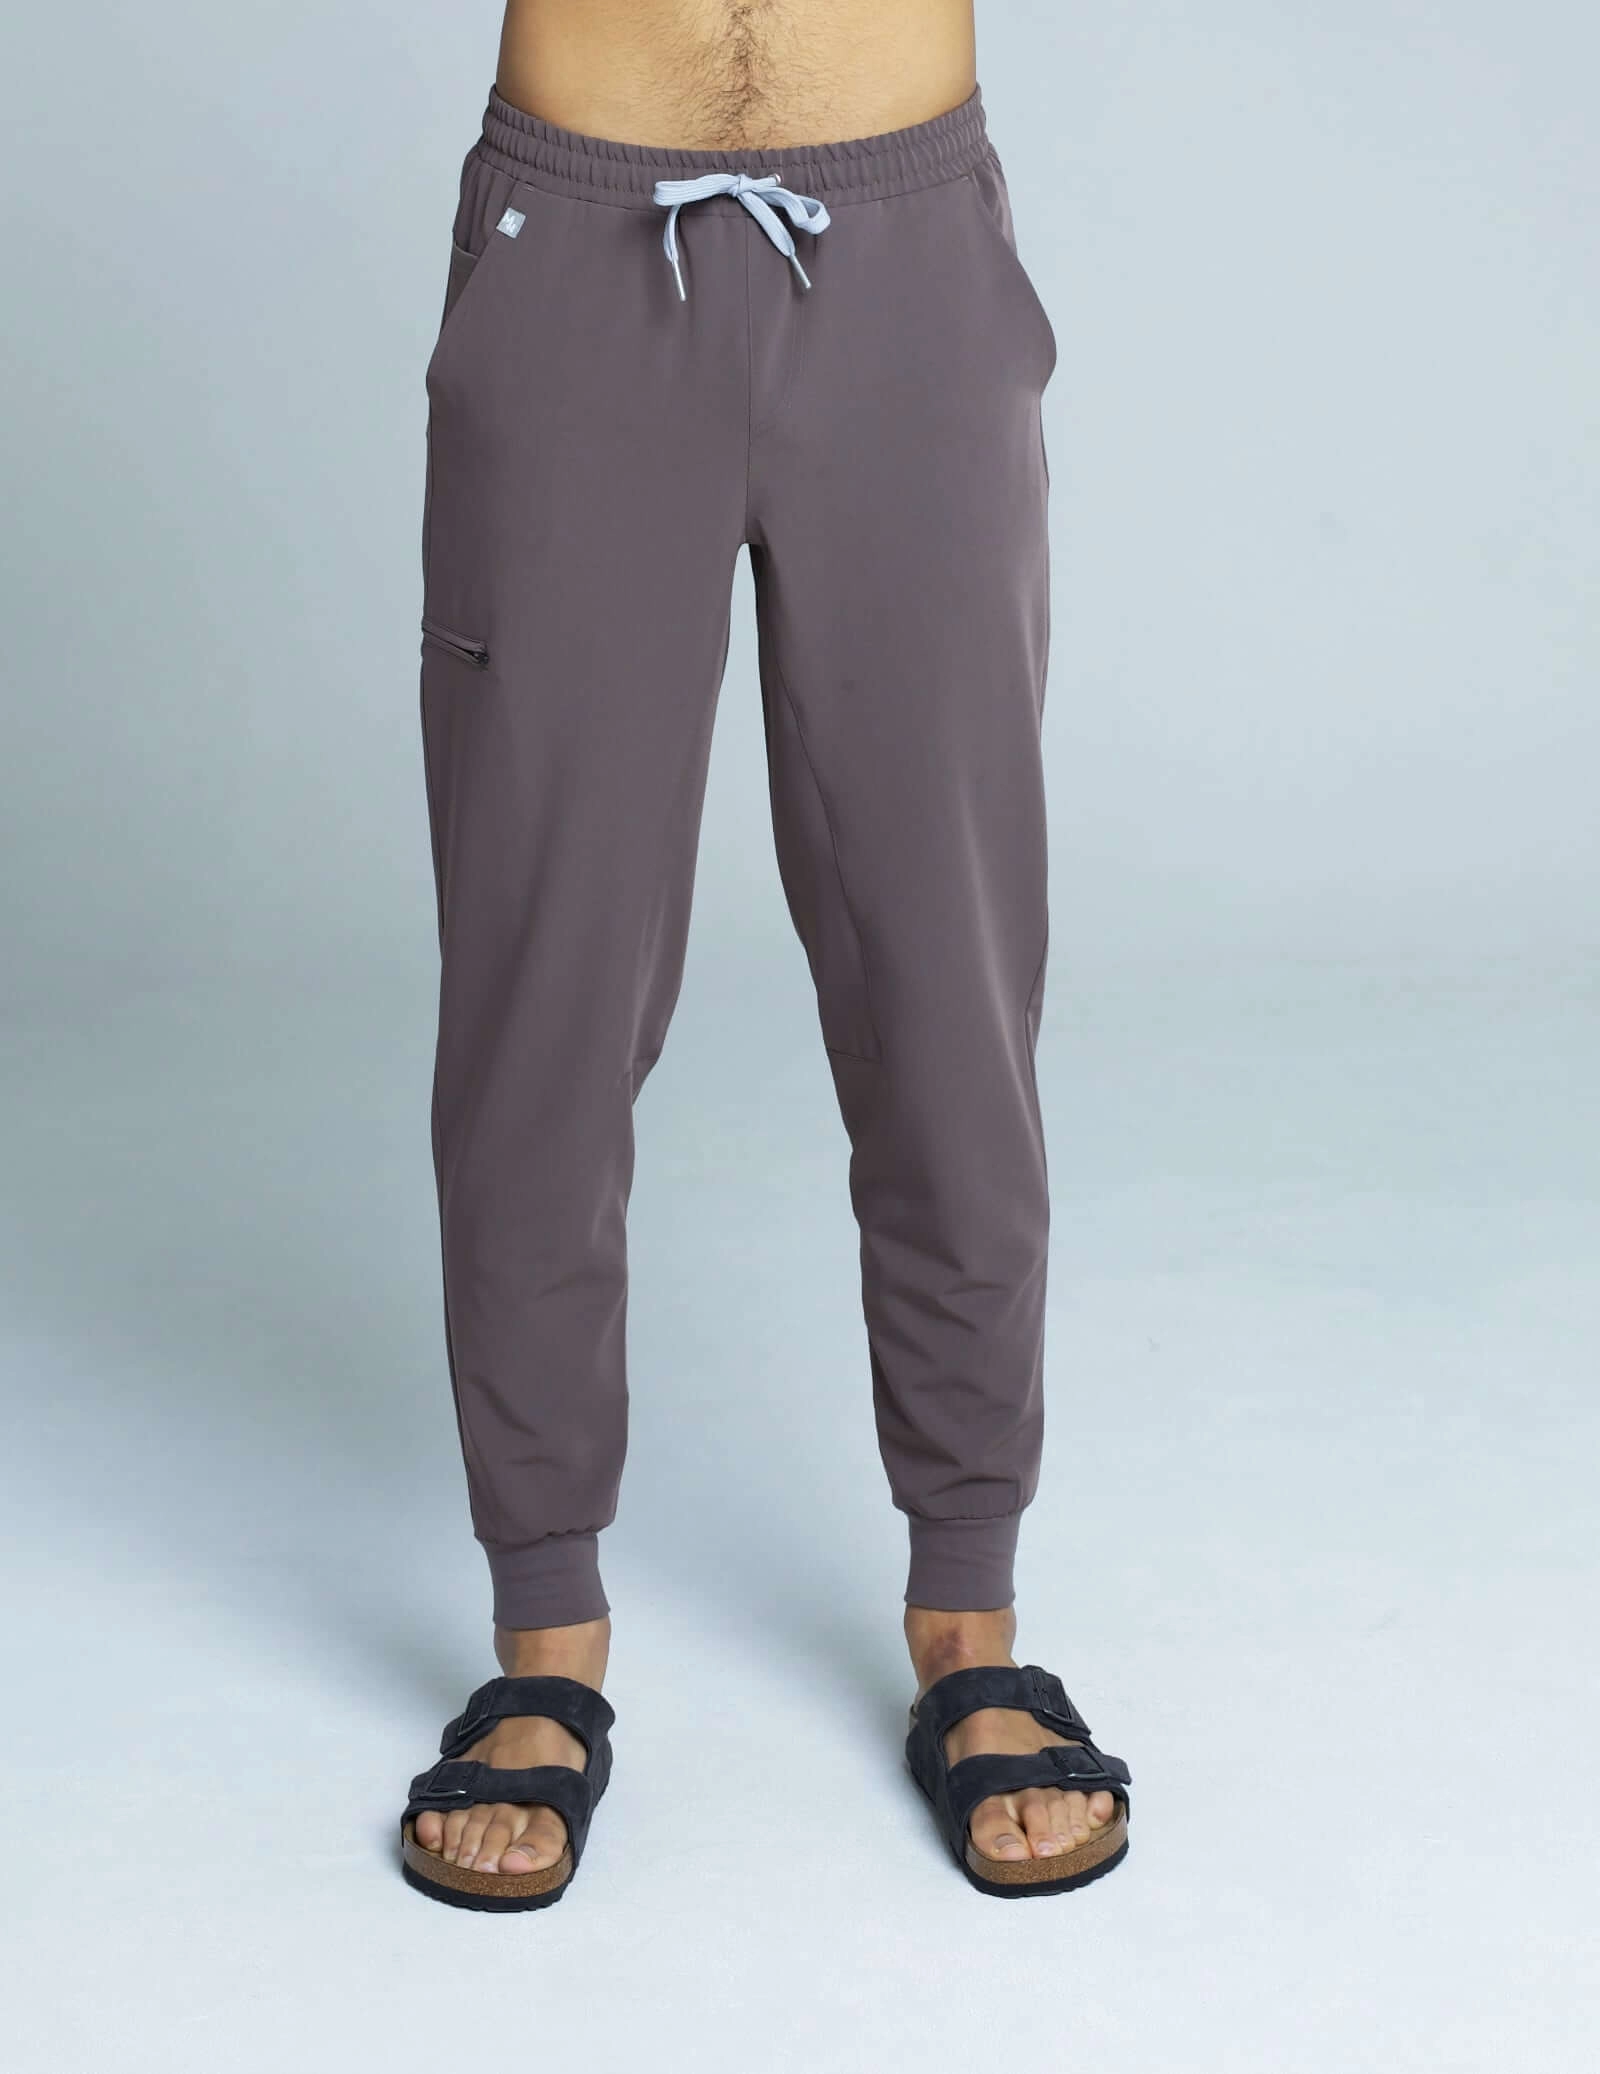 OUTLET Men's Jogger Pants - CHOCOLATE BROWN